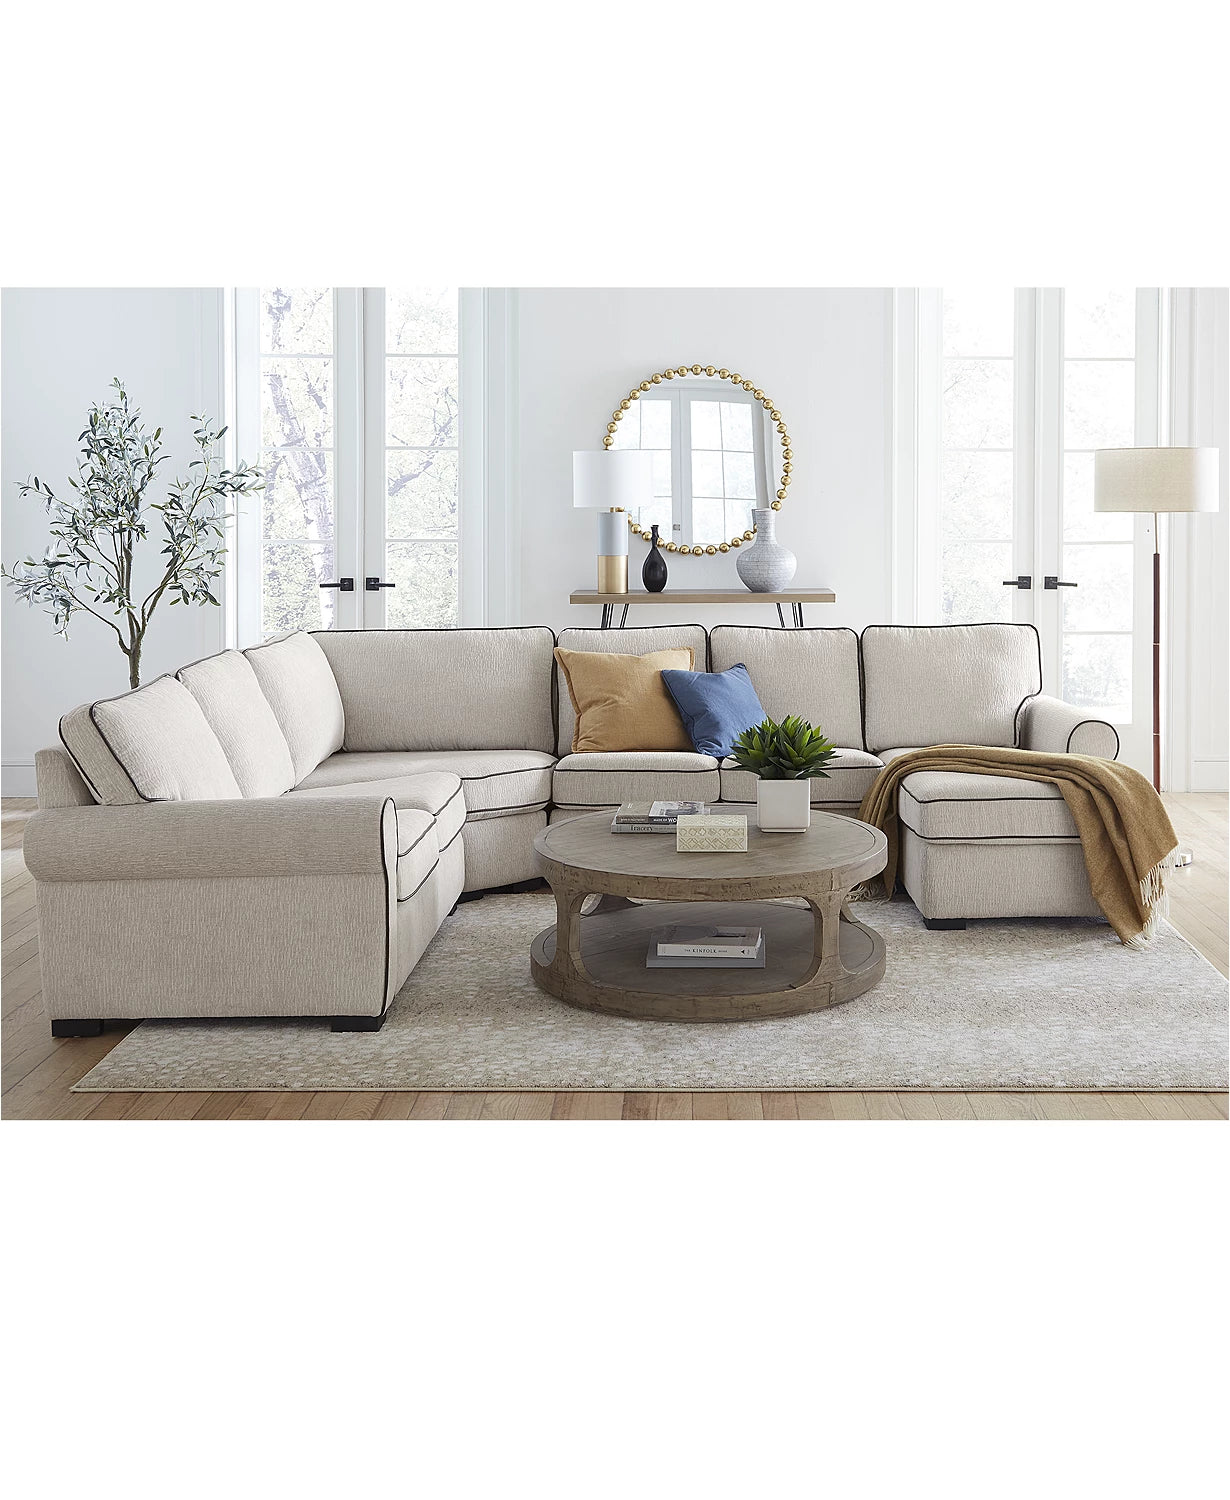 4pc Stationary Sectional